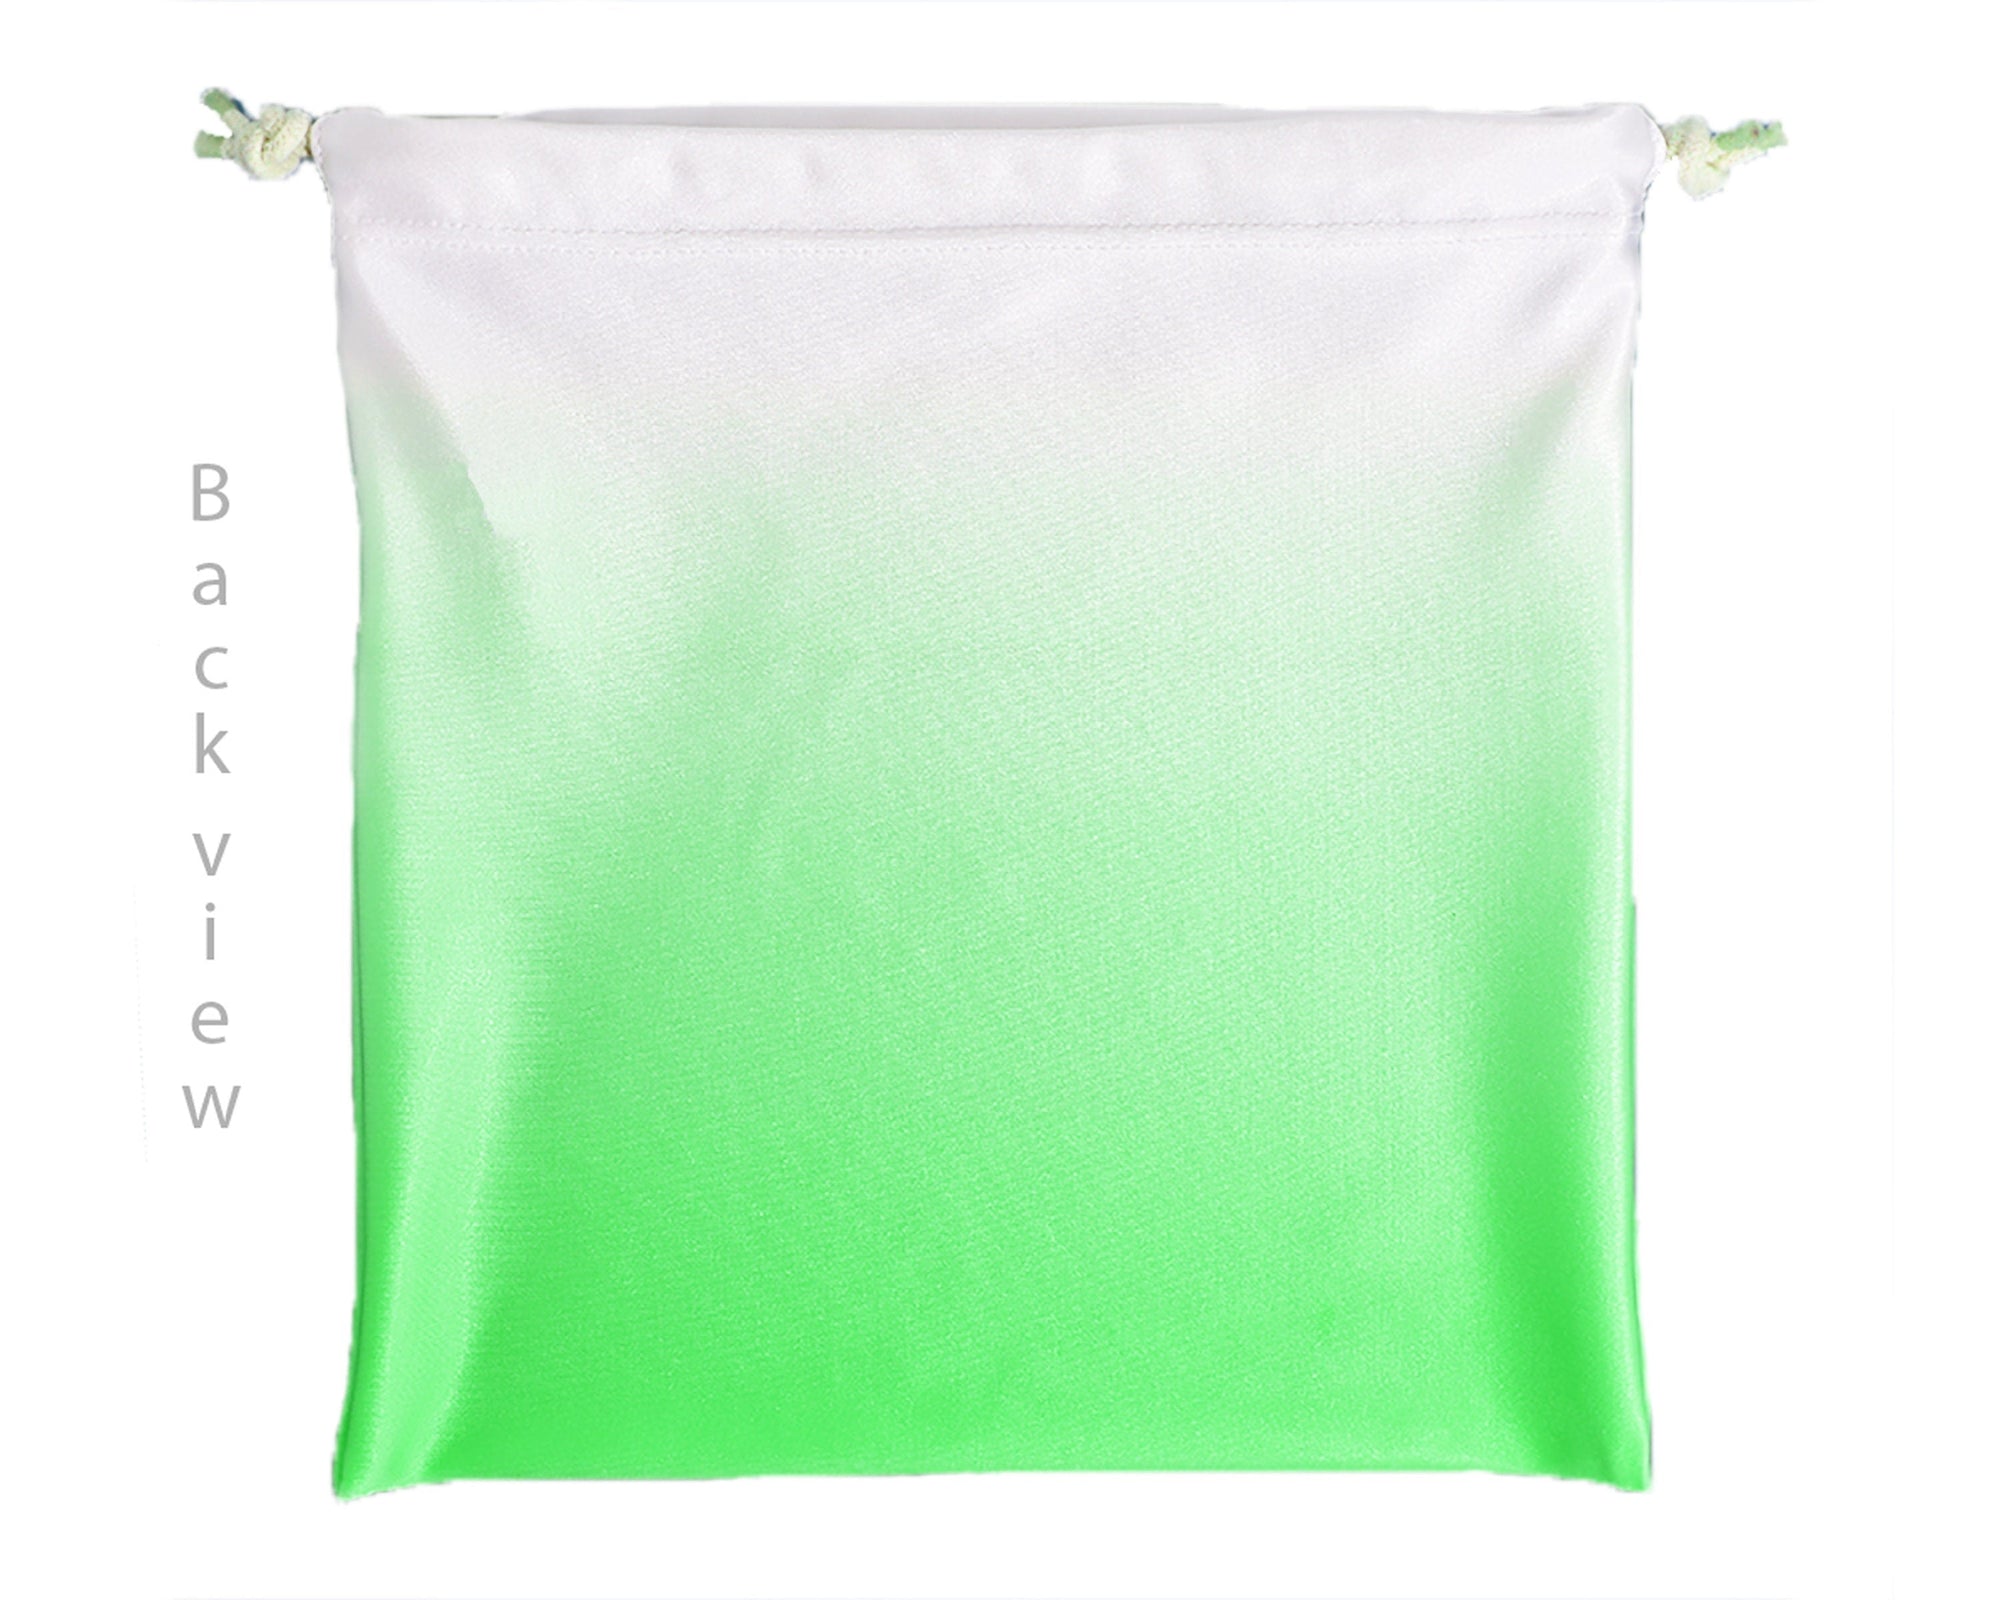 Gymnastics Grip Bag in Lime Green & White Ombre